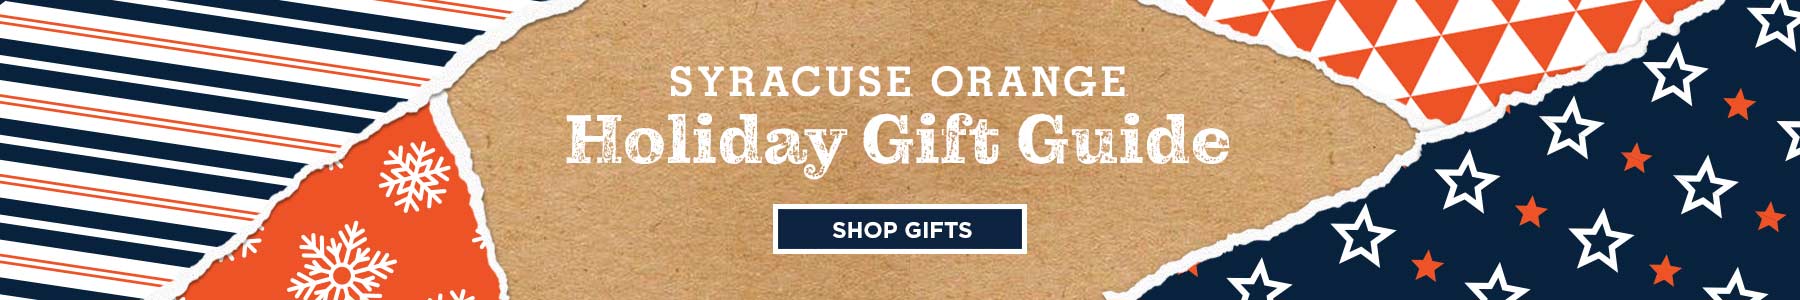 Orange Holiday Gift Guide